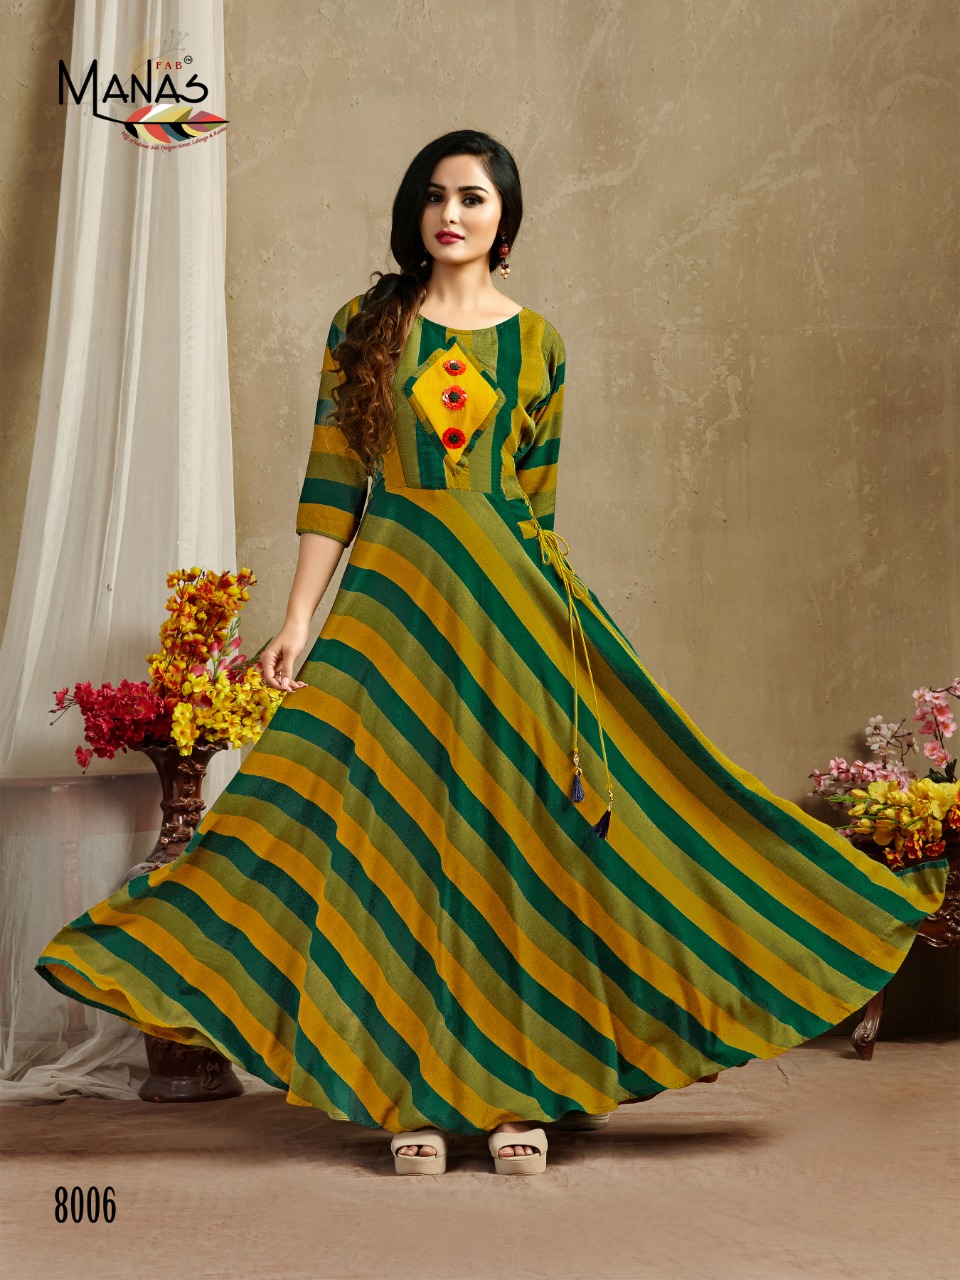 Manas Presents Classic Simple Designer Rayon Printed Gown Style Kurtis Catalogue Wholesaler